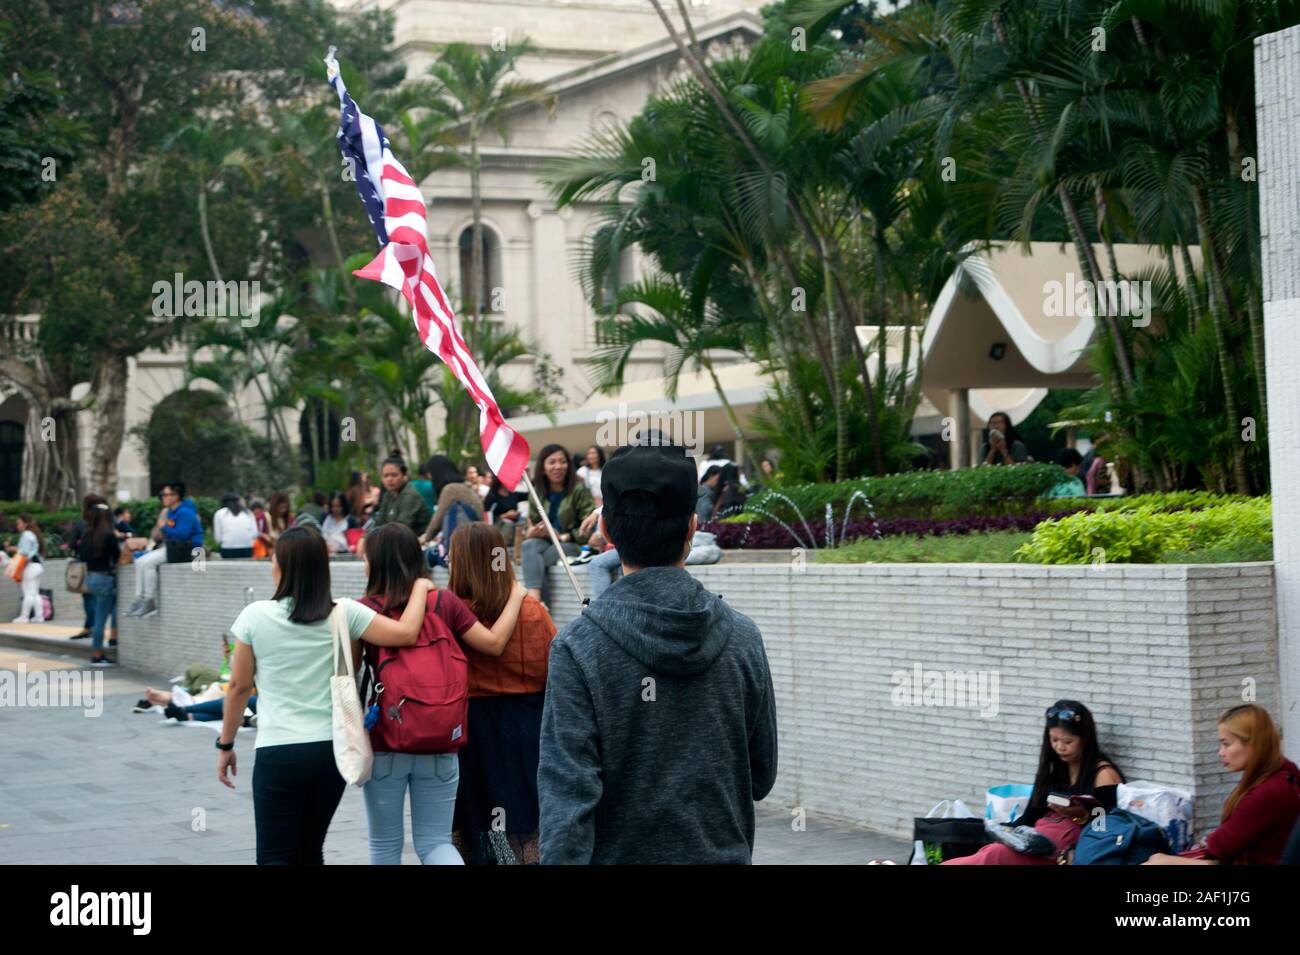 Hong Kong protesters carry the Stars & Stripes flag in support of the USA against the Chinese government and the CPC,Hong Kong, China, South East Asia Stock Photo